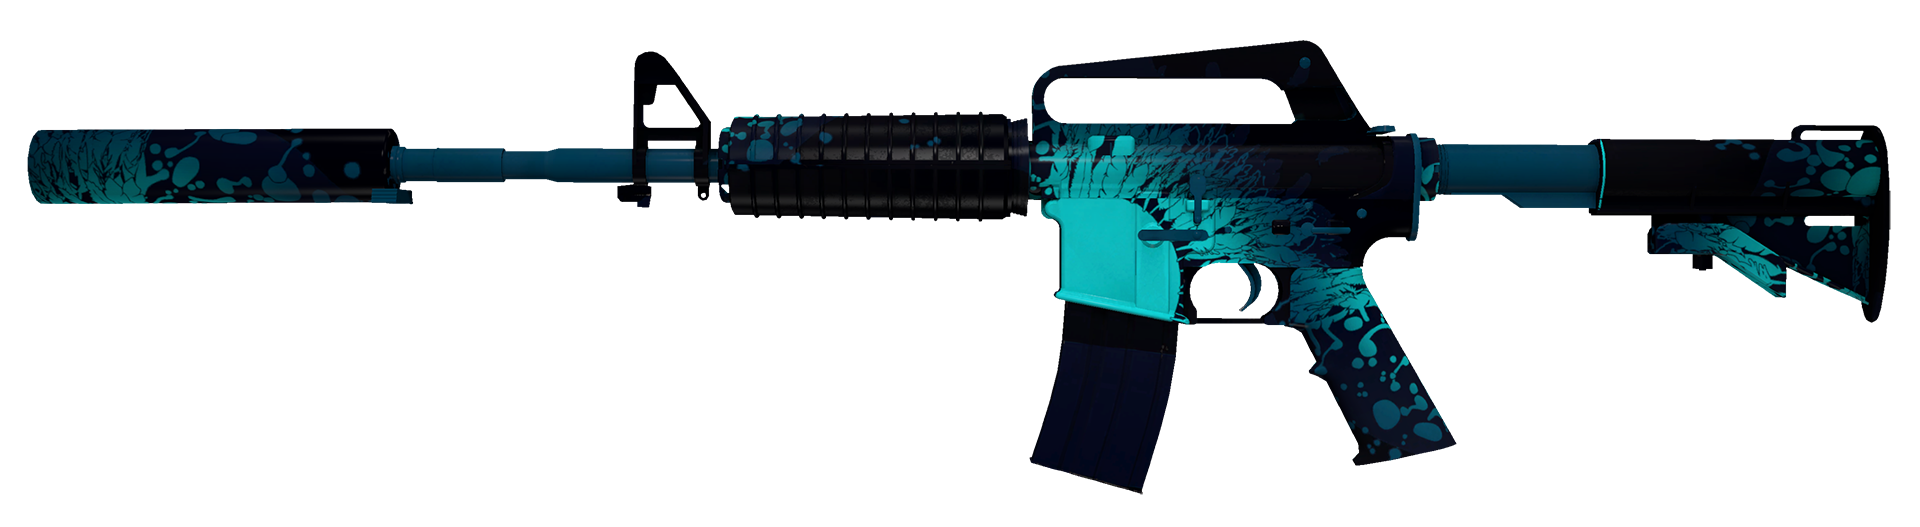 M4A1-S Icarus Fell Large Rendering